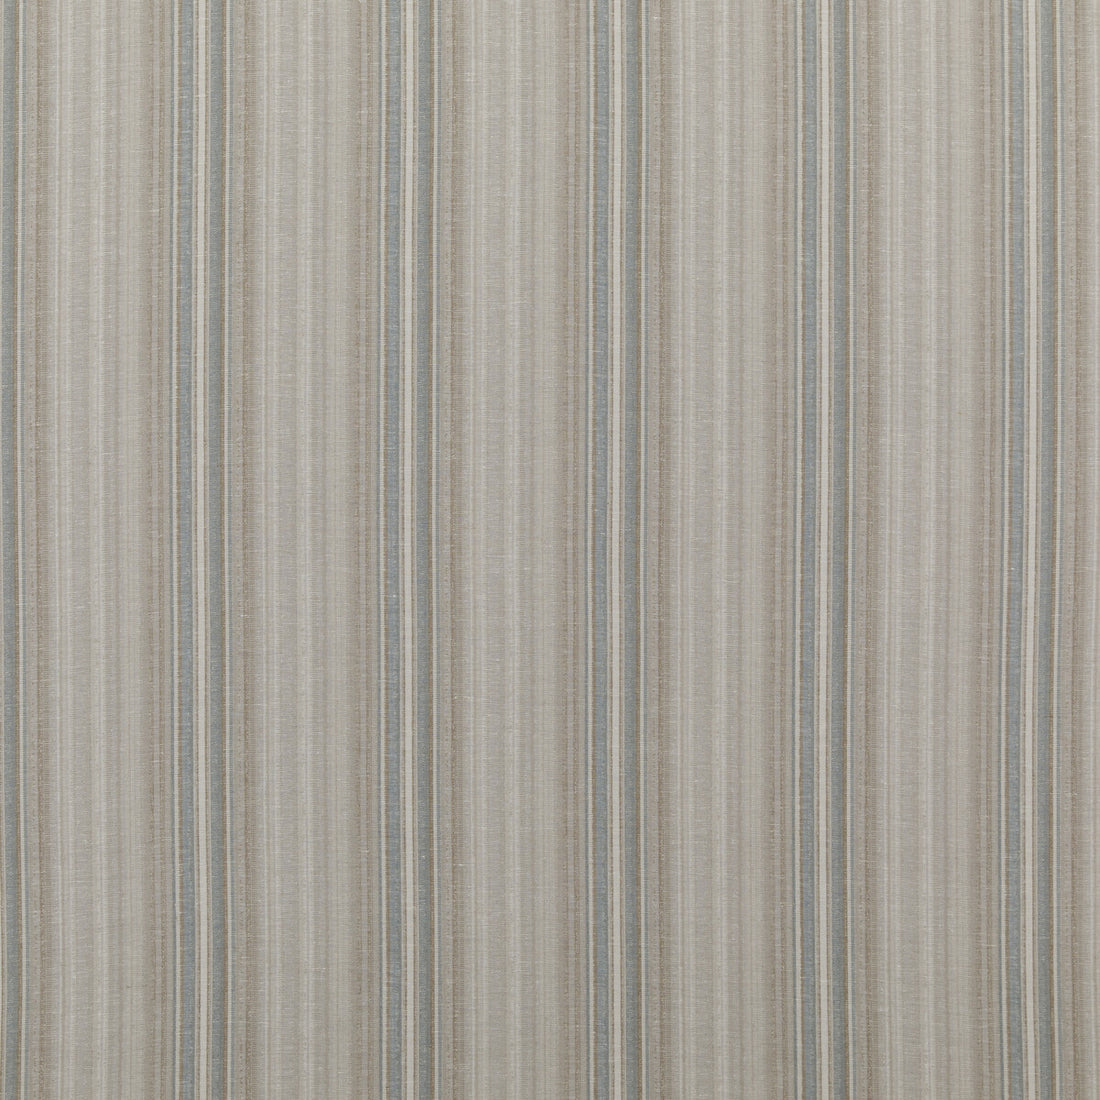 Claremont fabric in soft teal color - pattern FD776.R41.0 - by Mulberry in the Modern Country collection